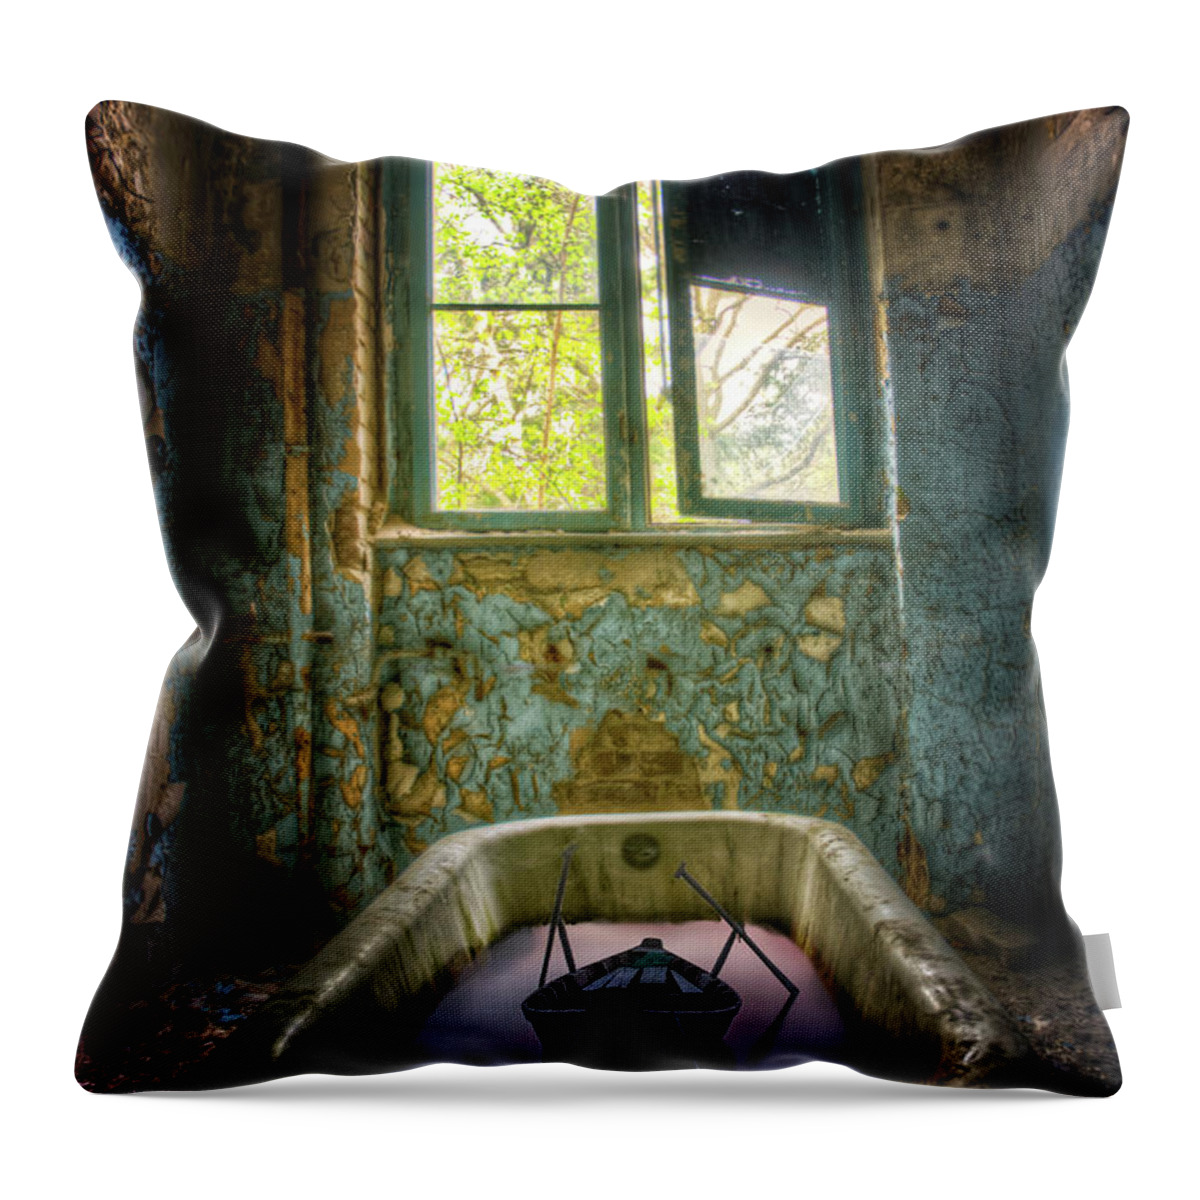 Abandoned Throw Pillow featuring the digital art Bath toy by Nathan Wright